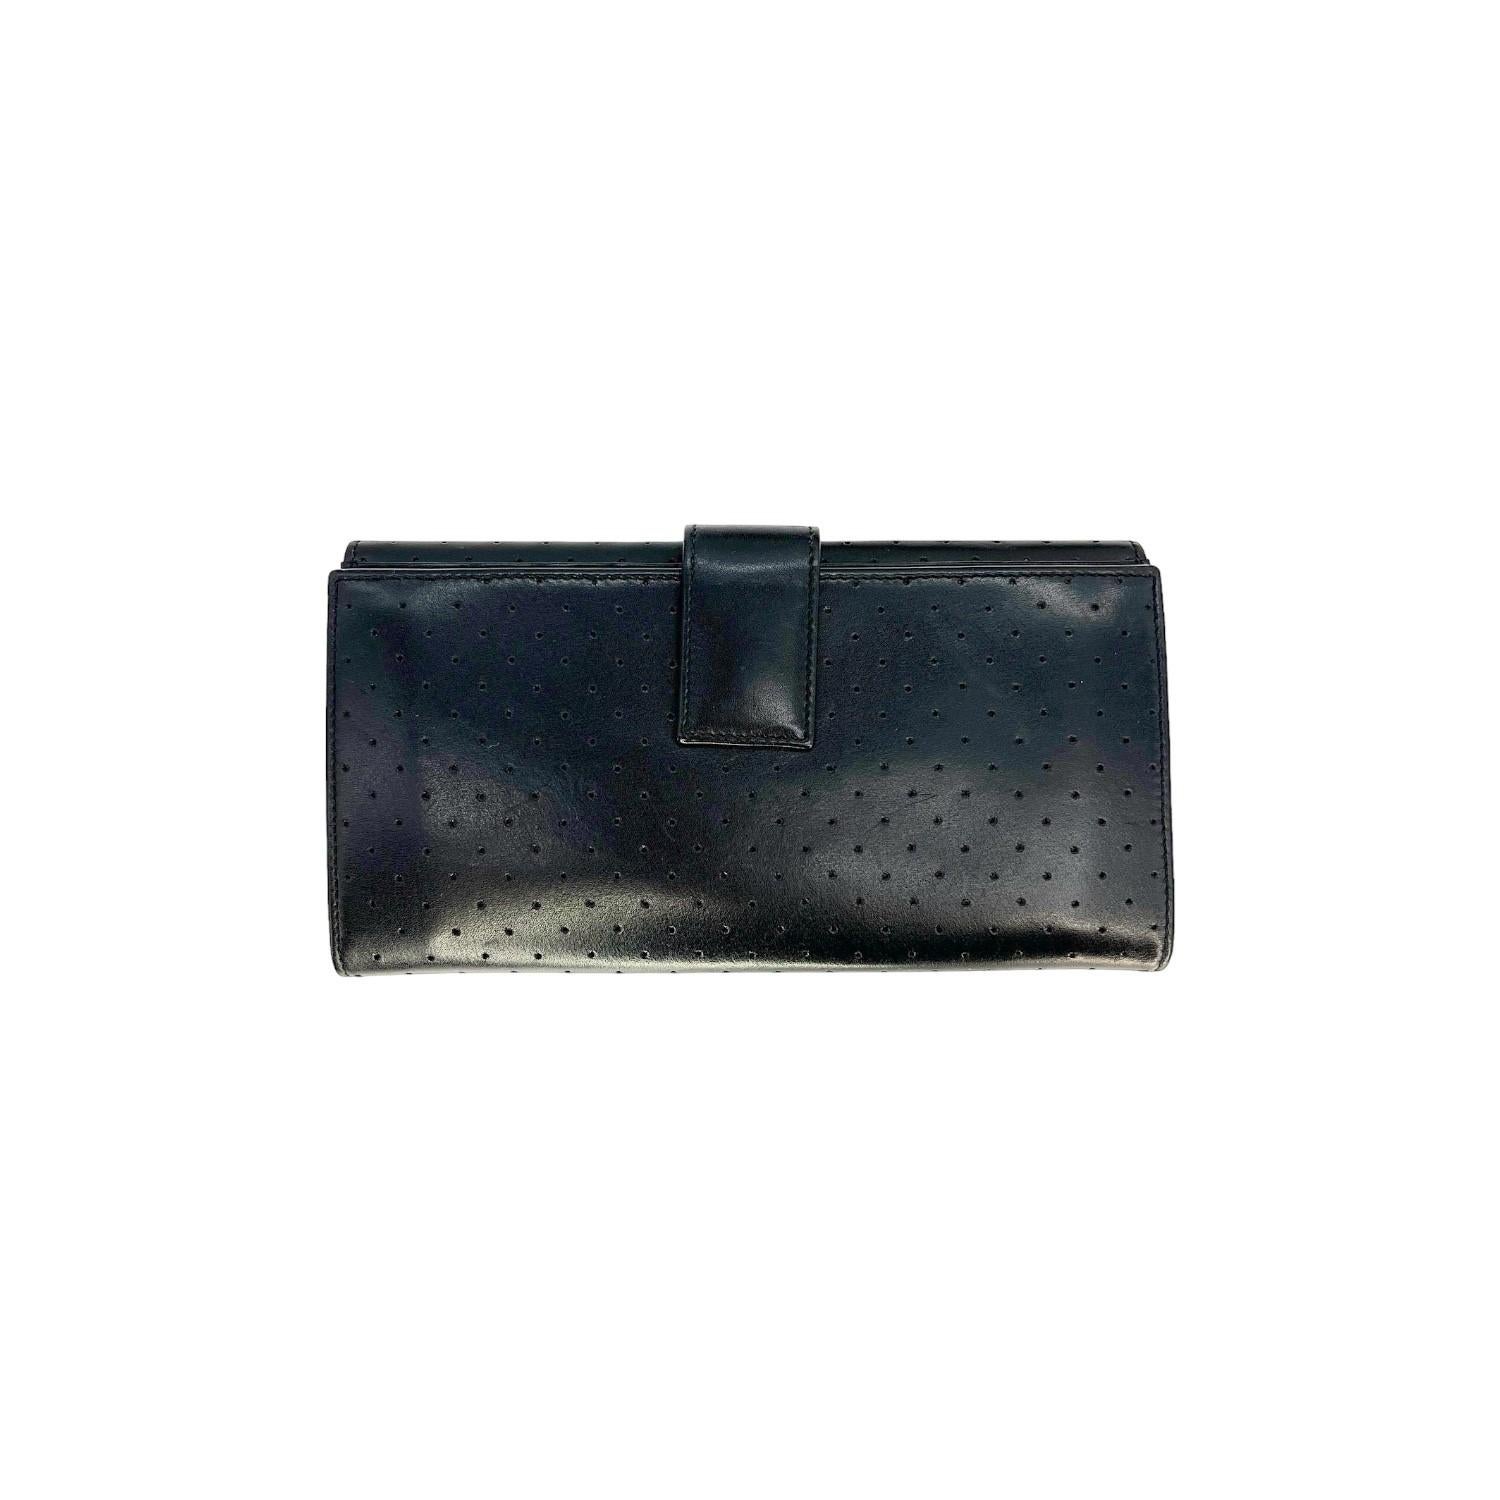 Gucci Vintage Perforated Continental Wallet In Good Condition For Sale In Scottsdale, AZ